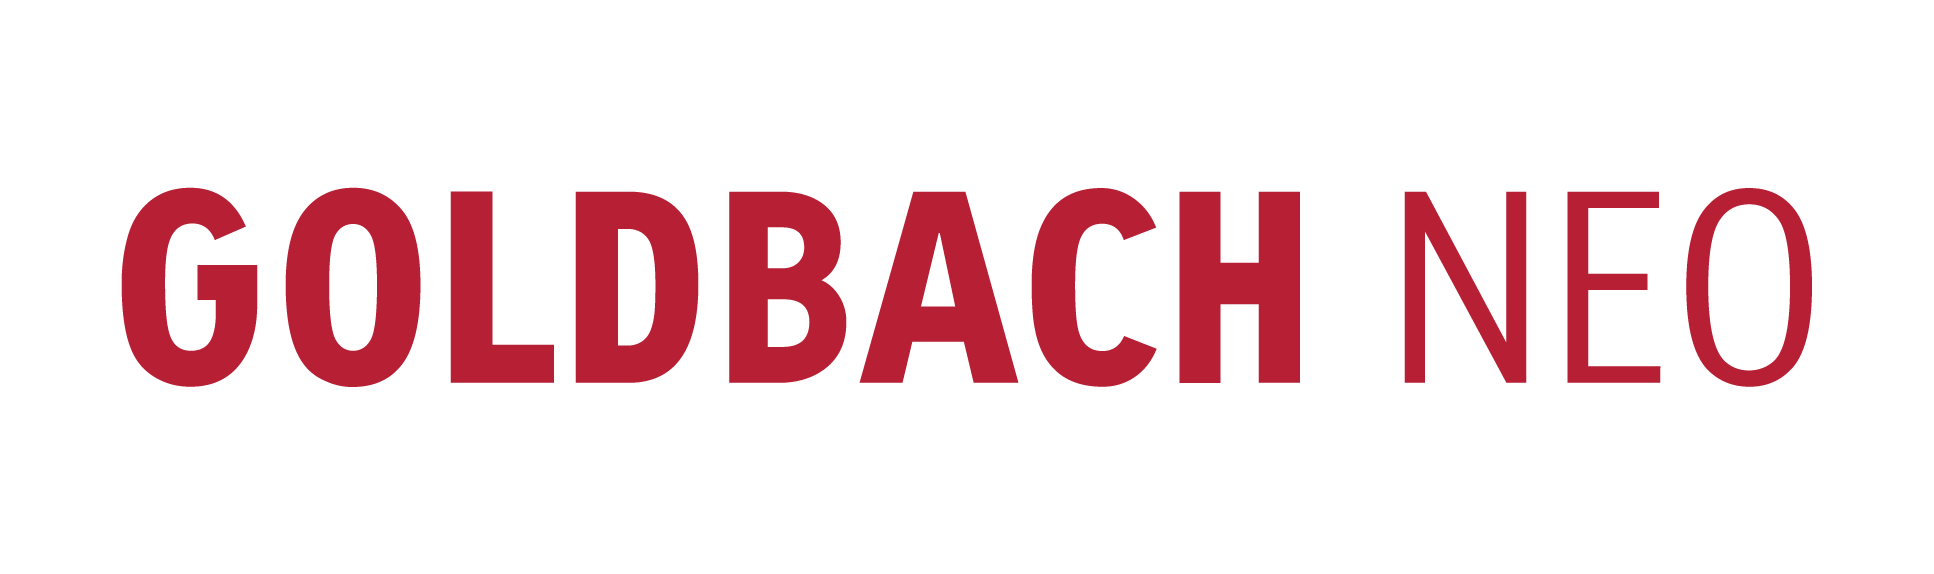 Goldbach - Your message is our passion